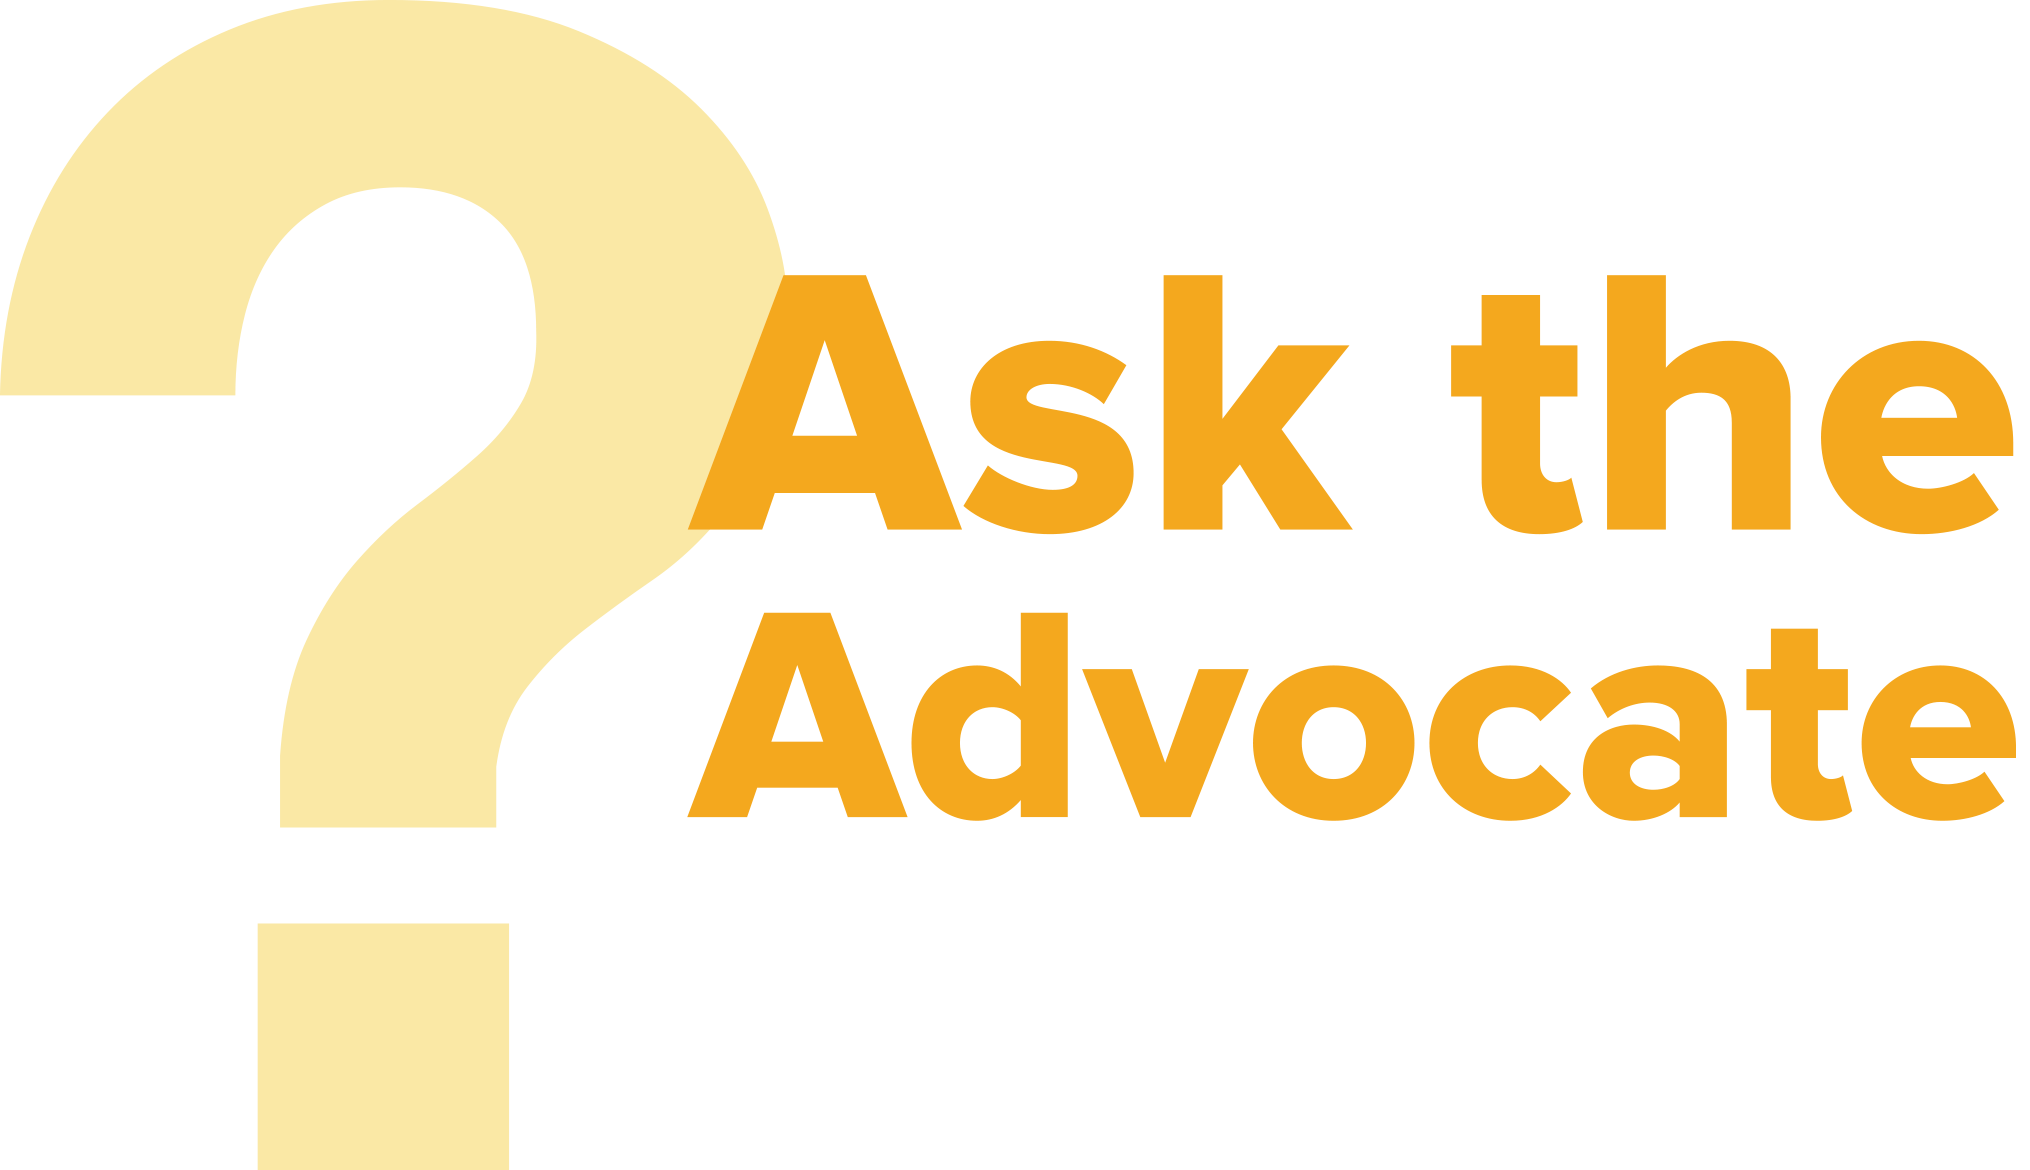 Ask the Advocate for Business